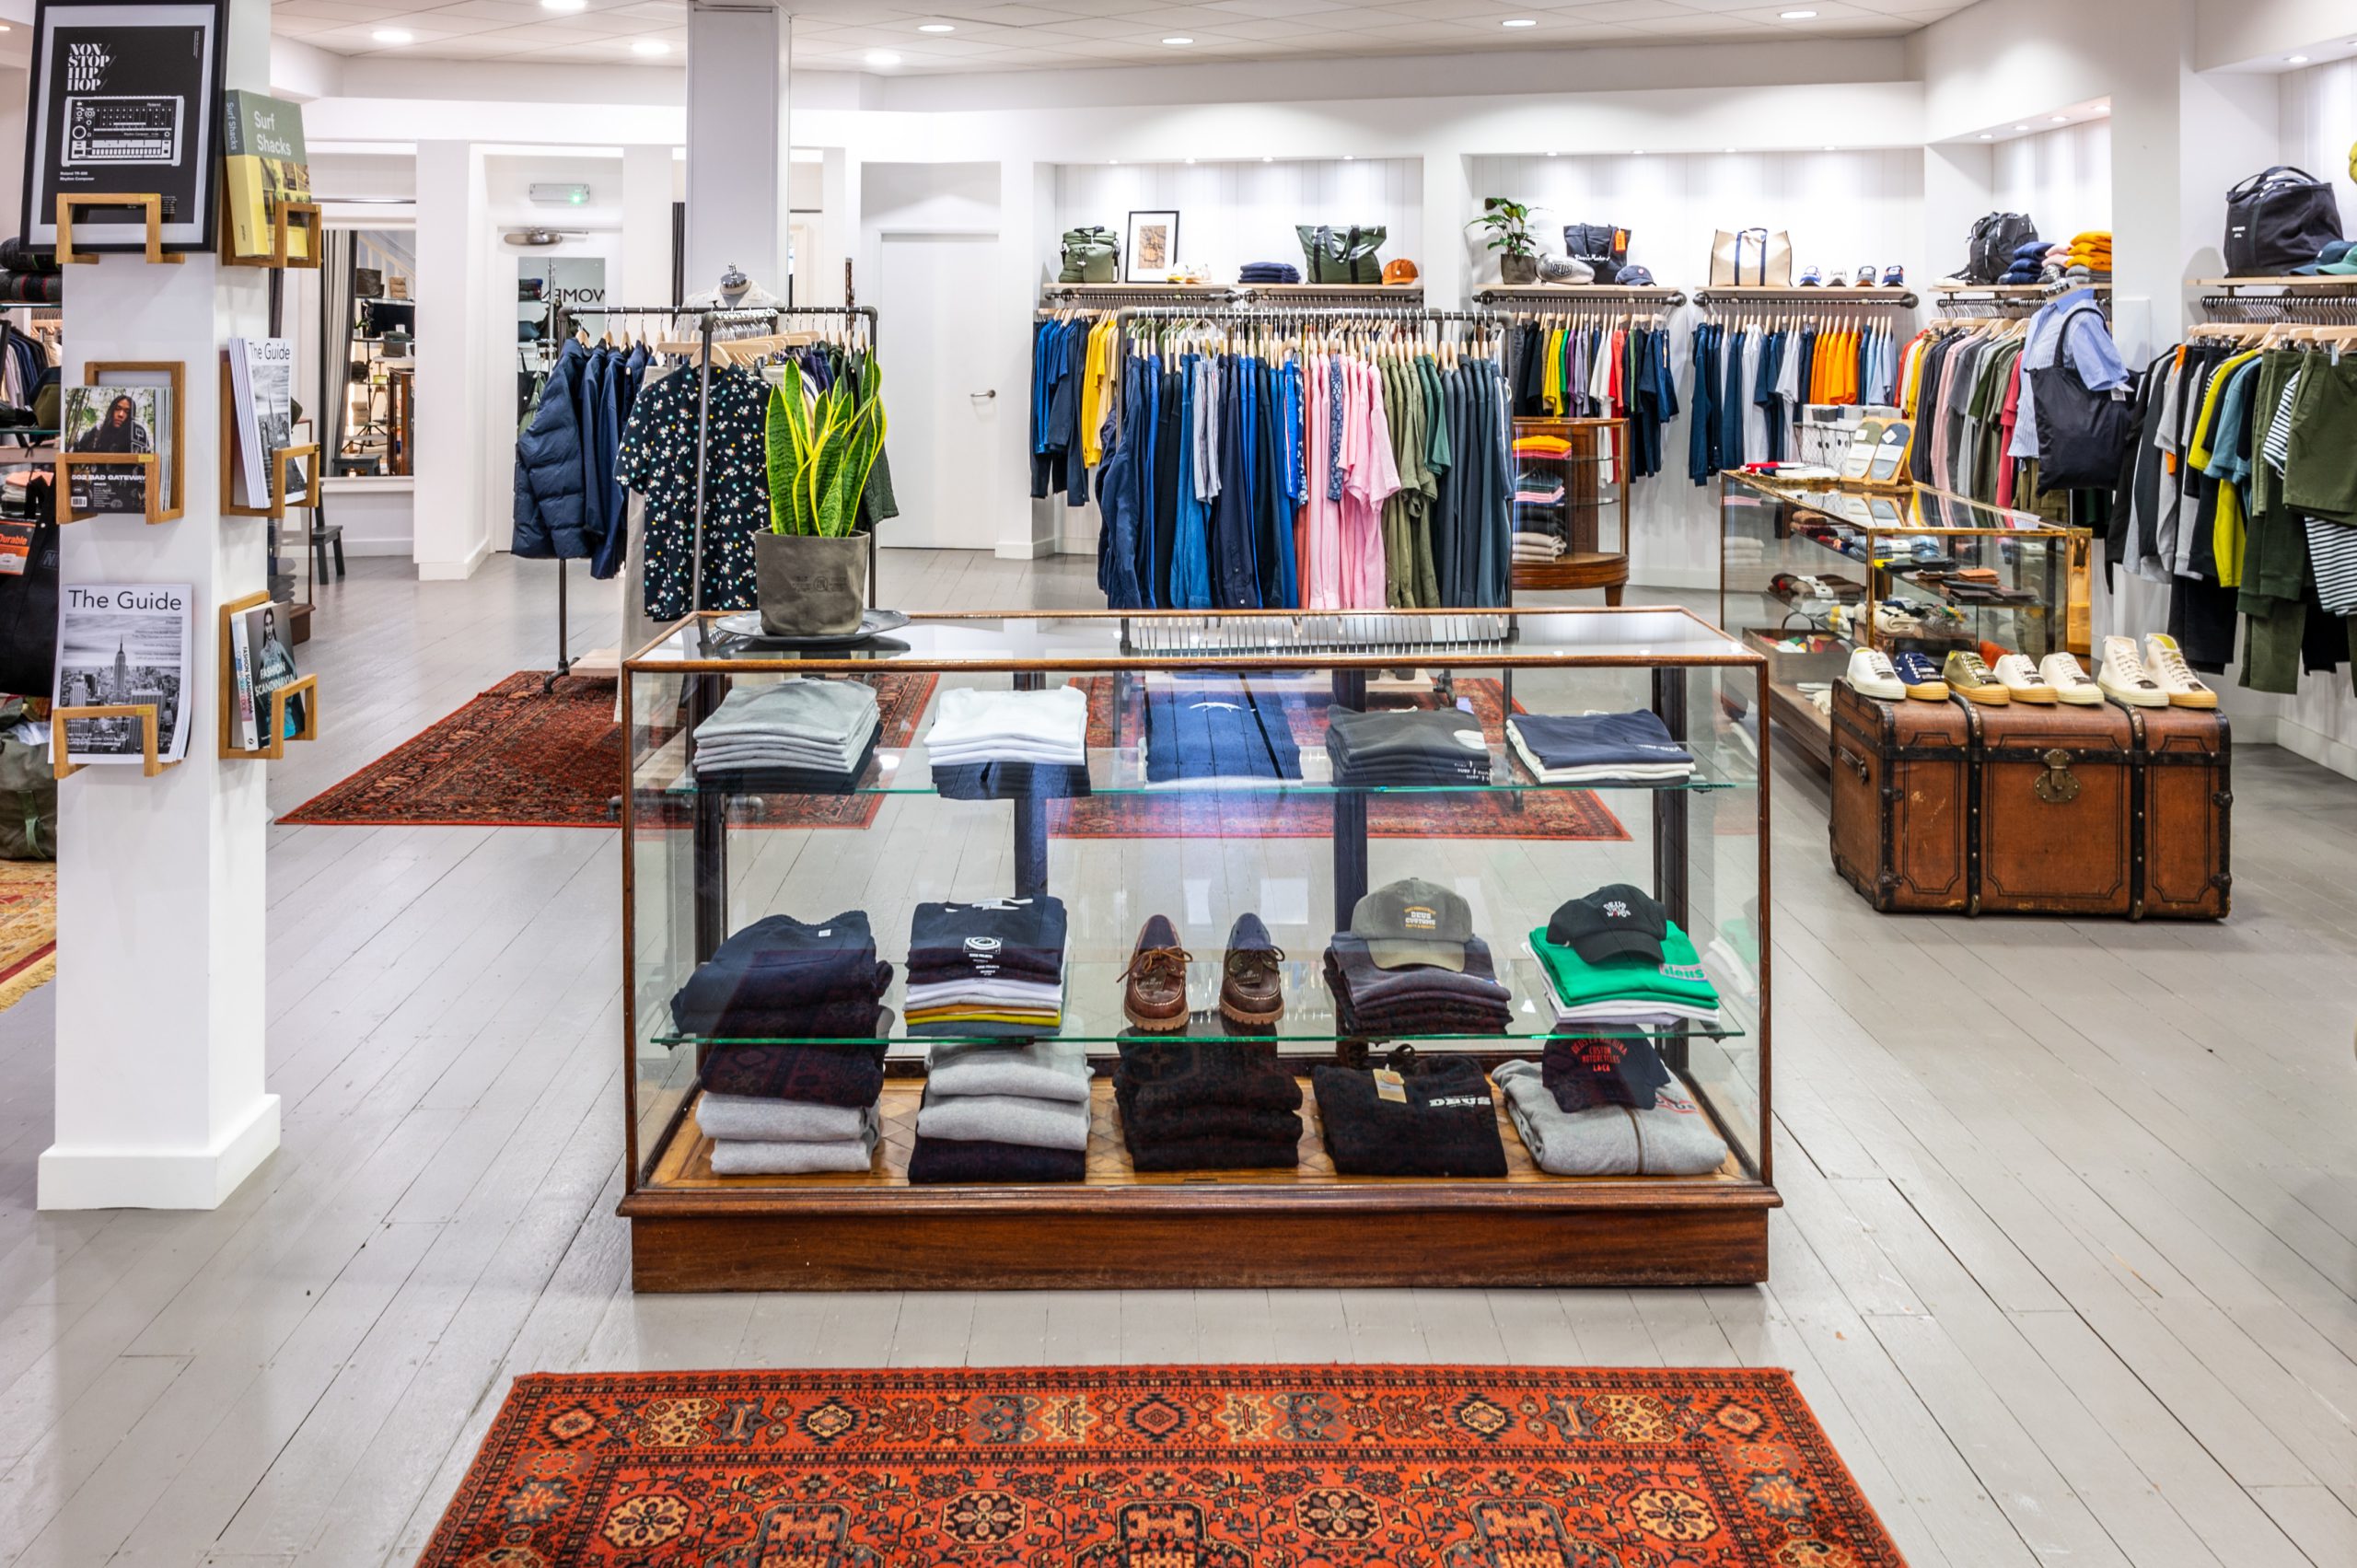 The Best Men's Clothing Stores The UK: Edition